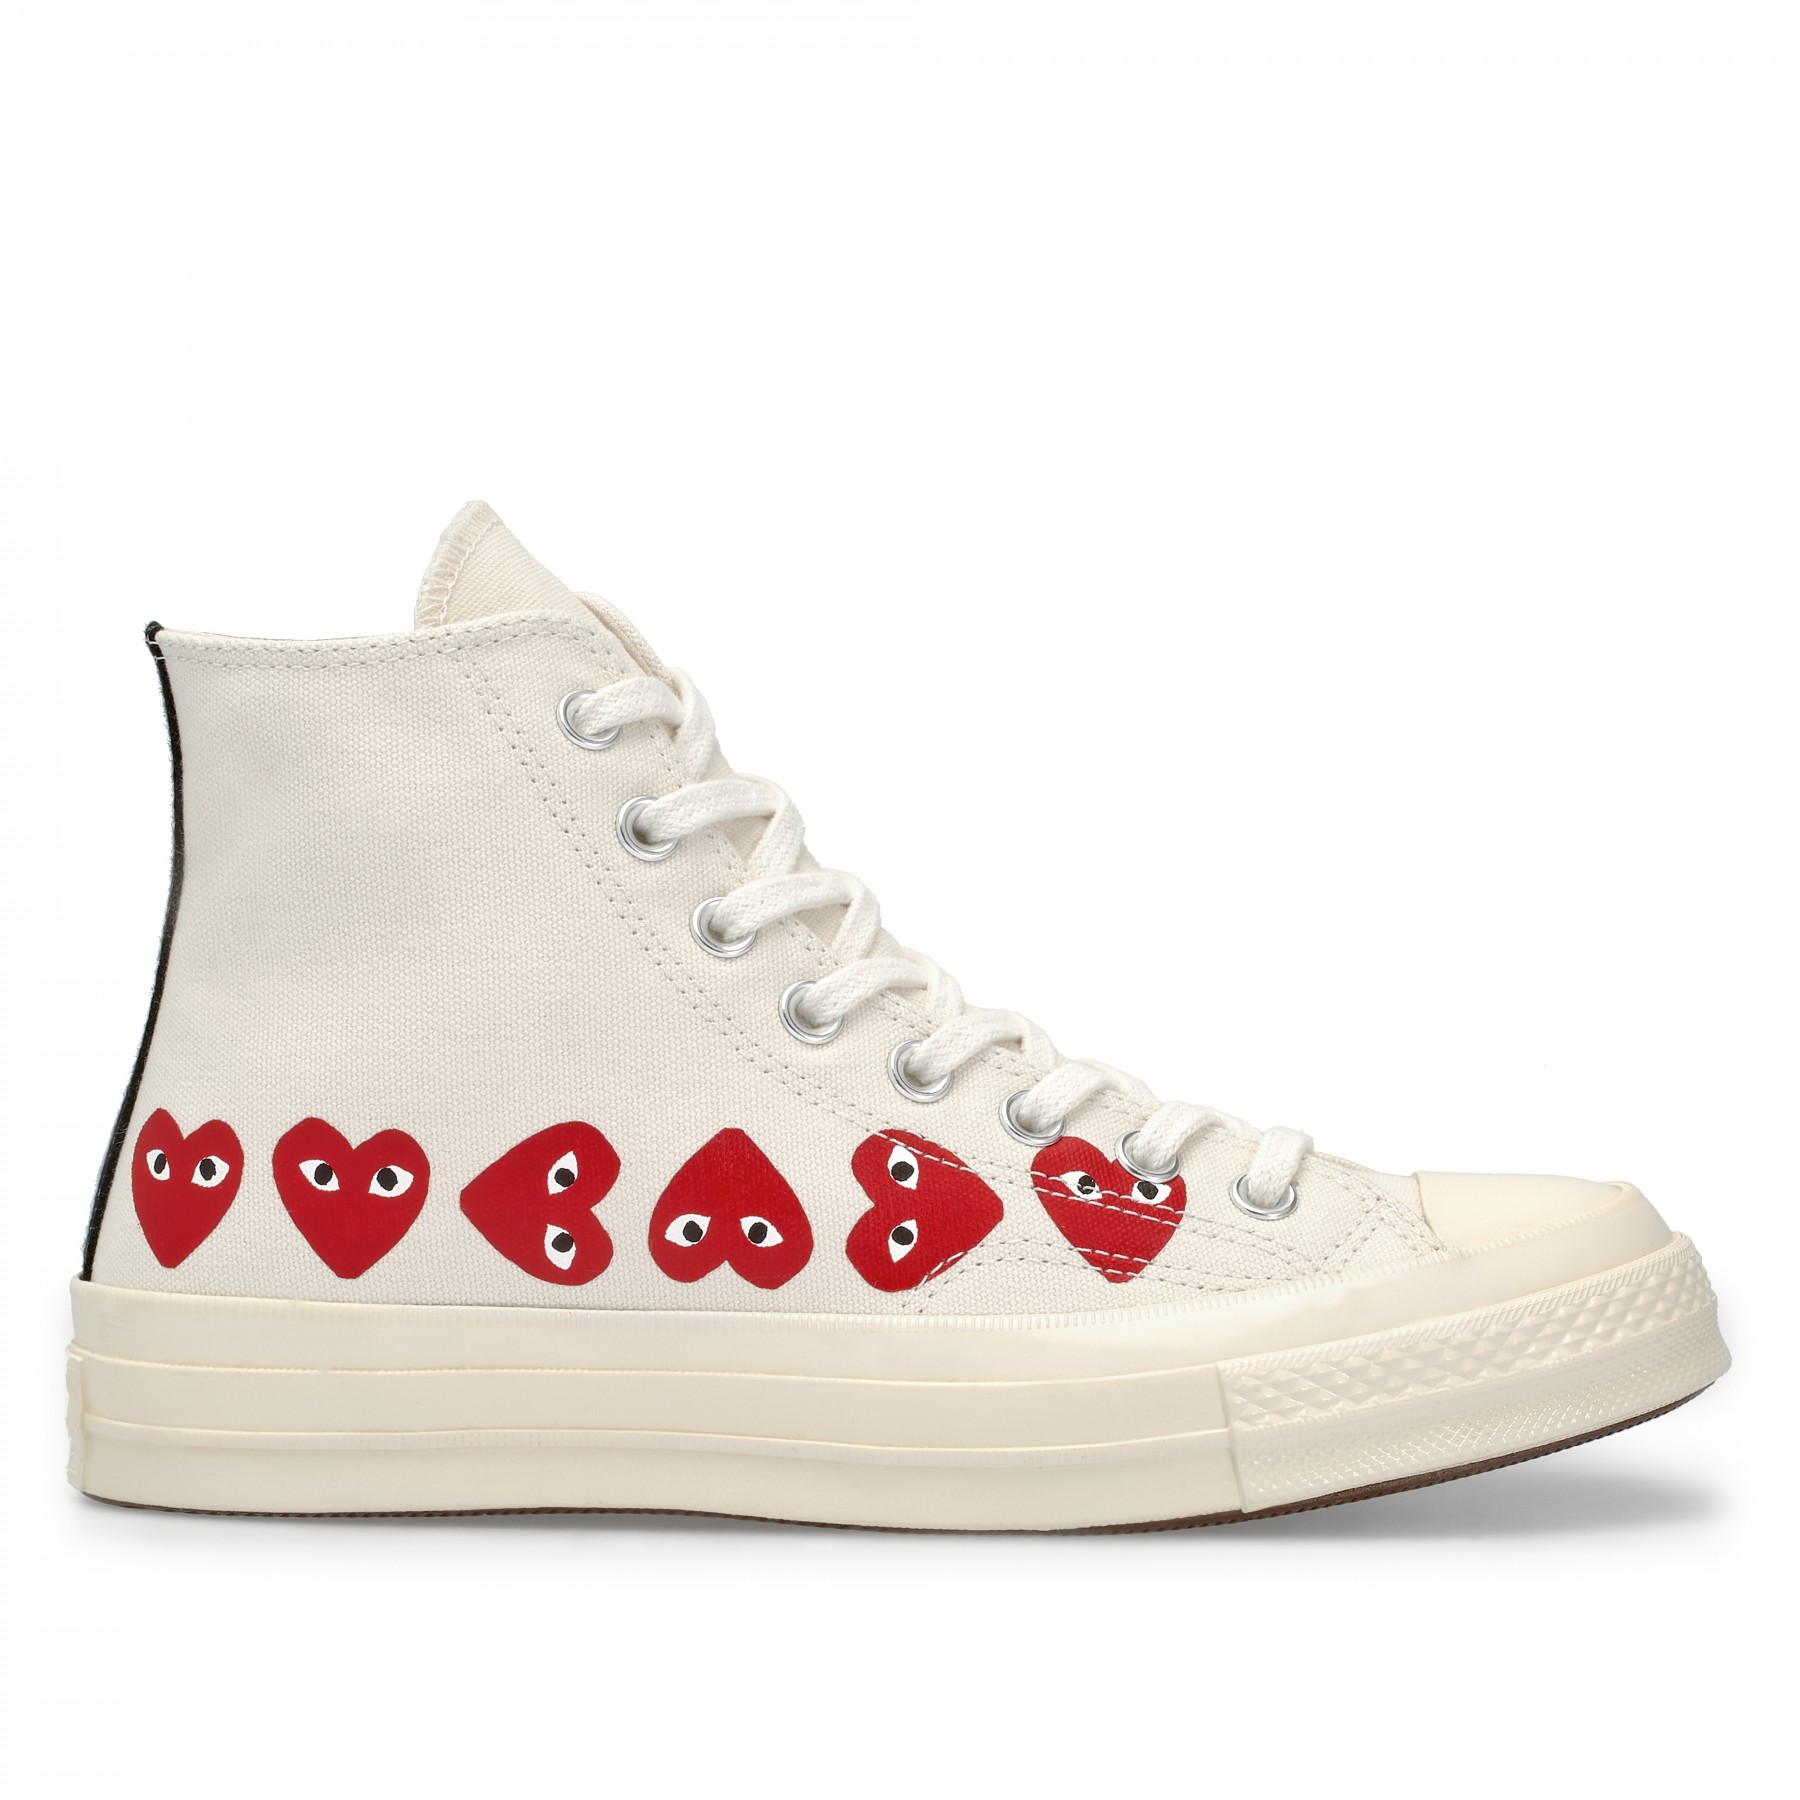 New Converse All Star by PLAY Comme des Garçons